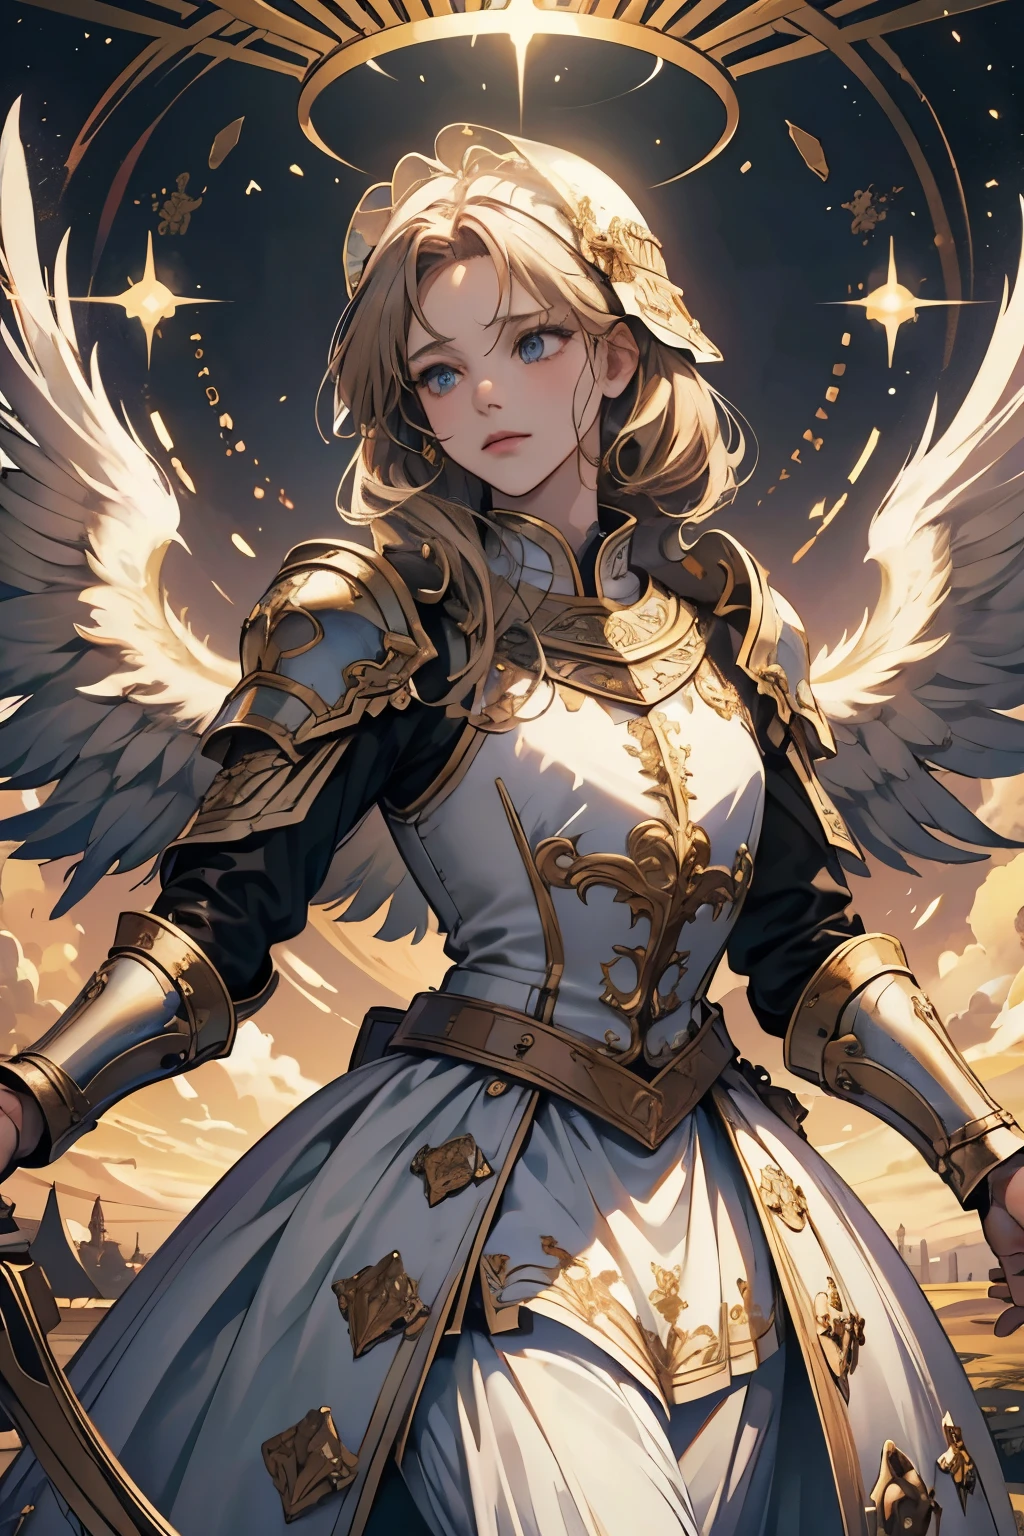 (ultra-detailed, faceless, helmetless Renaissance soldier portrait in heaven: 1.2),
delicate yet expressive features, ethereal aura, divine radiance, intricate armor details, worn textures, BREAK, a celestial background, ethereal clouds, golden halos, serene angels playing harps, floating cherubs, heavenly landscapes, Avante-garde perspective, creating an immersive, otherworldly feel.

This faceless Renaissance soldier portrait, striding confidently in heaven, exudes an enigmatic allure. Despite his homeless, his intricately designed armor gleams with a subtle, otherworld